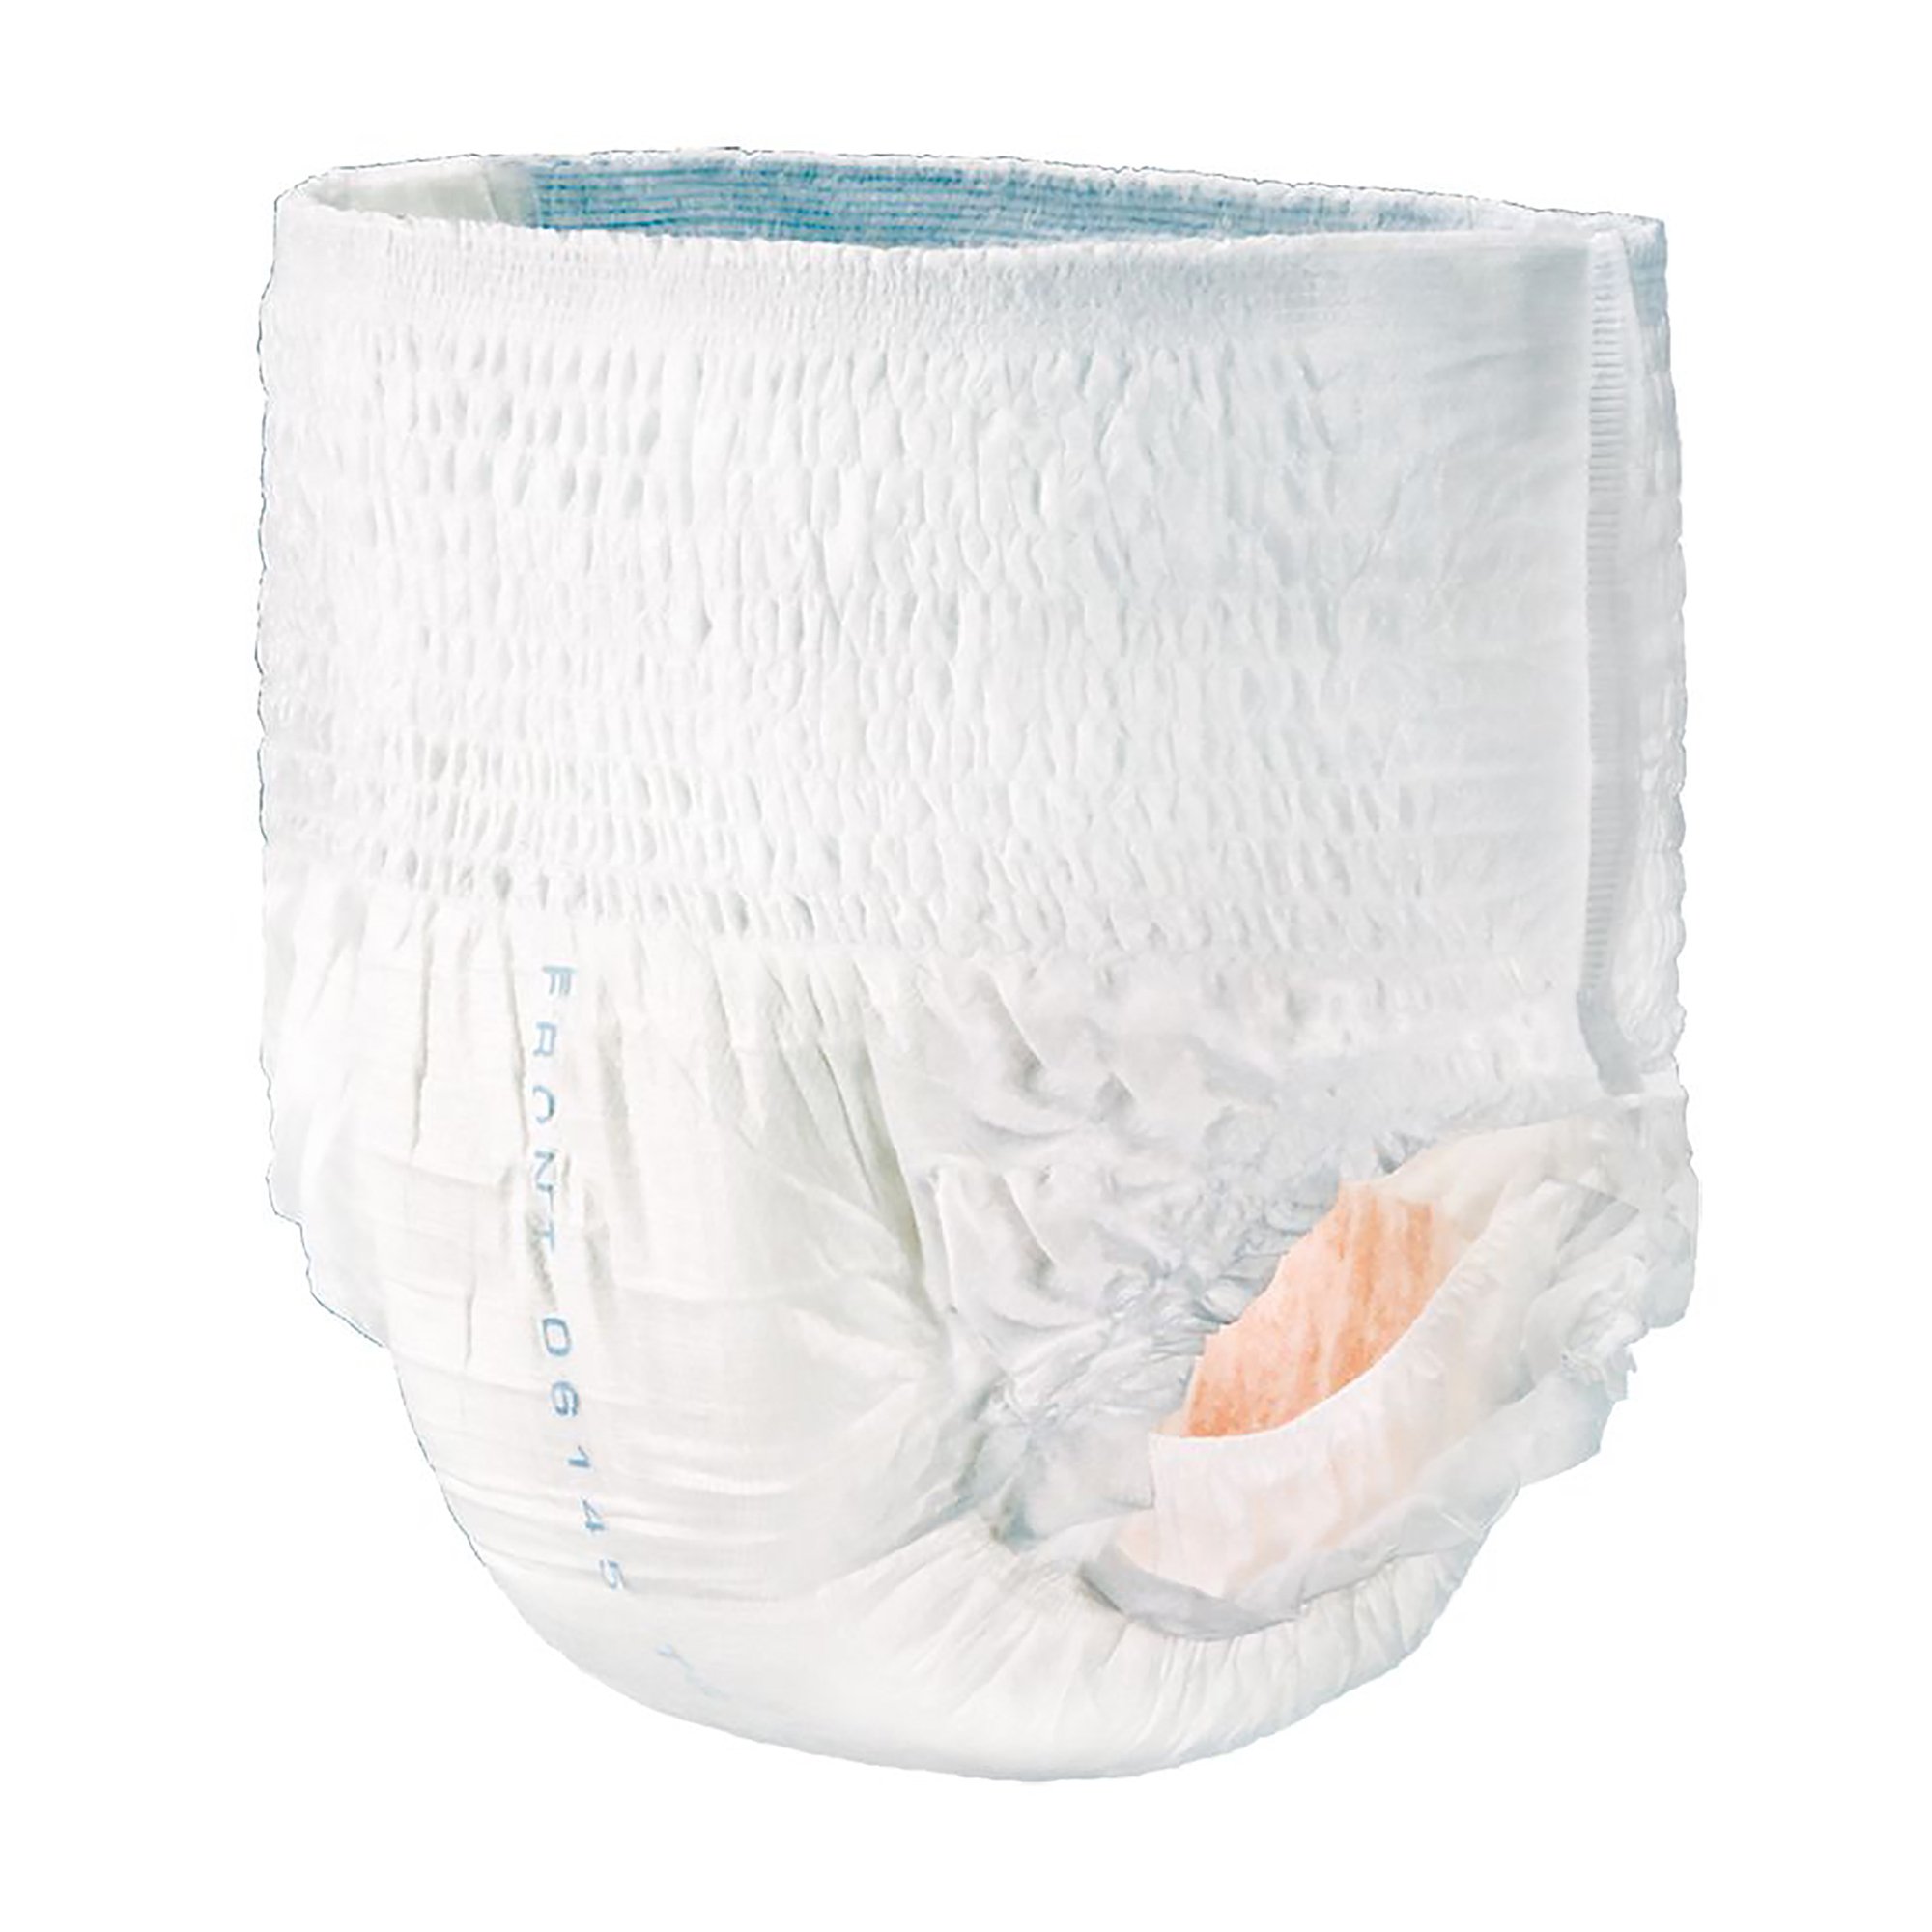 Tranquility® Premium OverNight™ Maximum Protection Absorbent Underwear, Extra Small